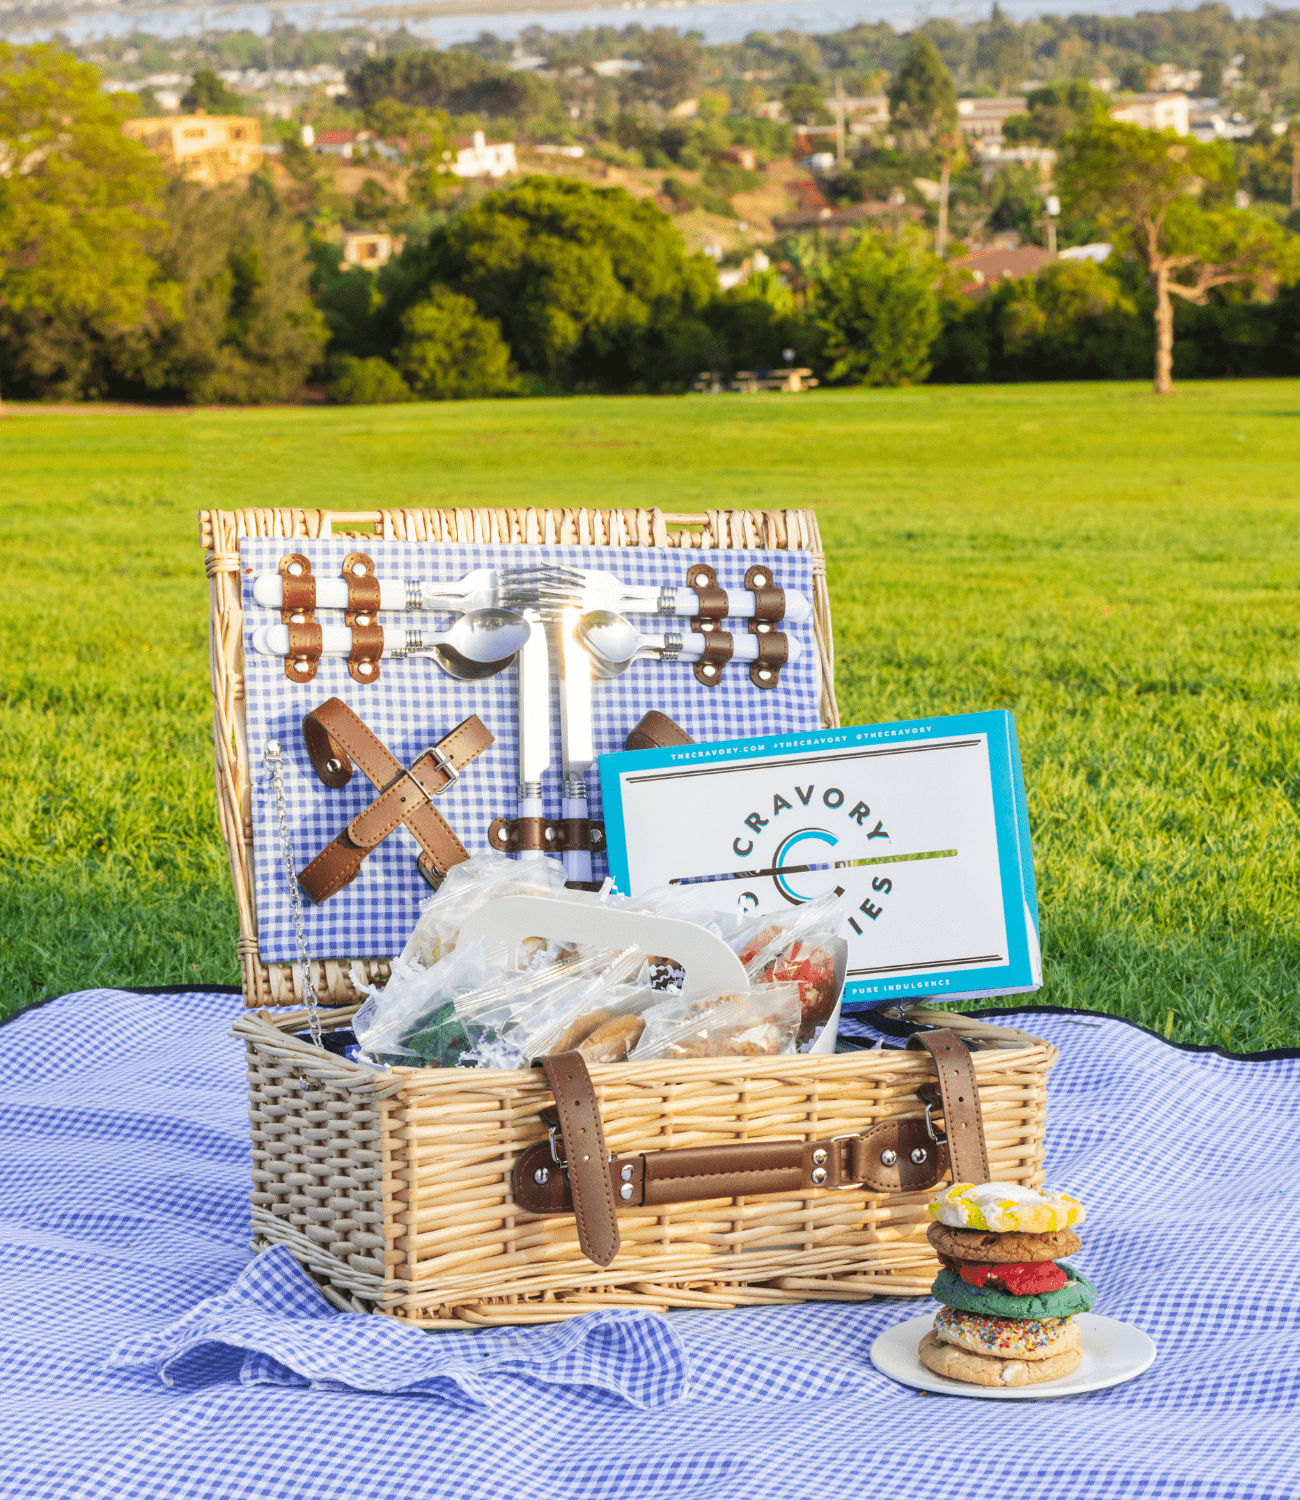 Picnic basket with assorted cookies